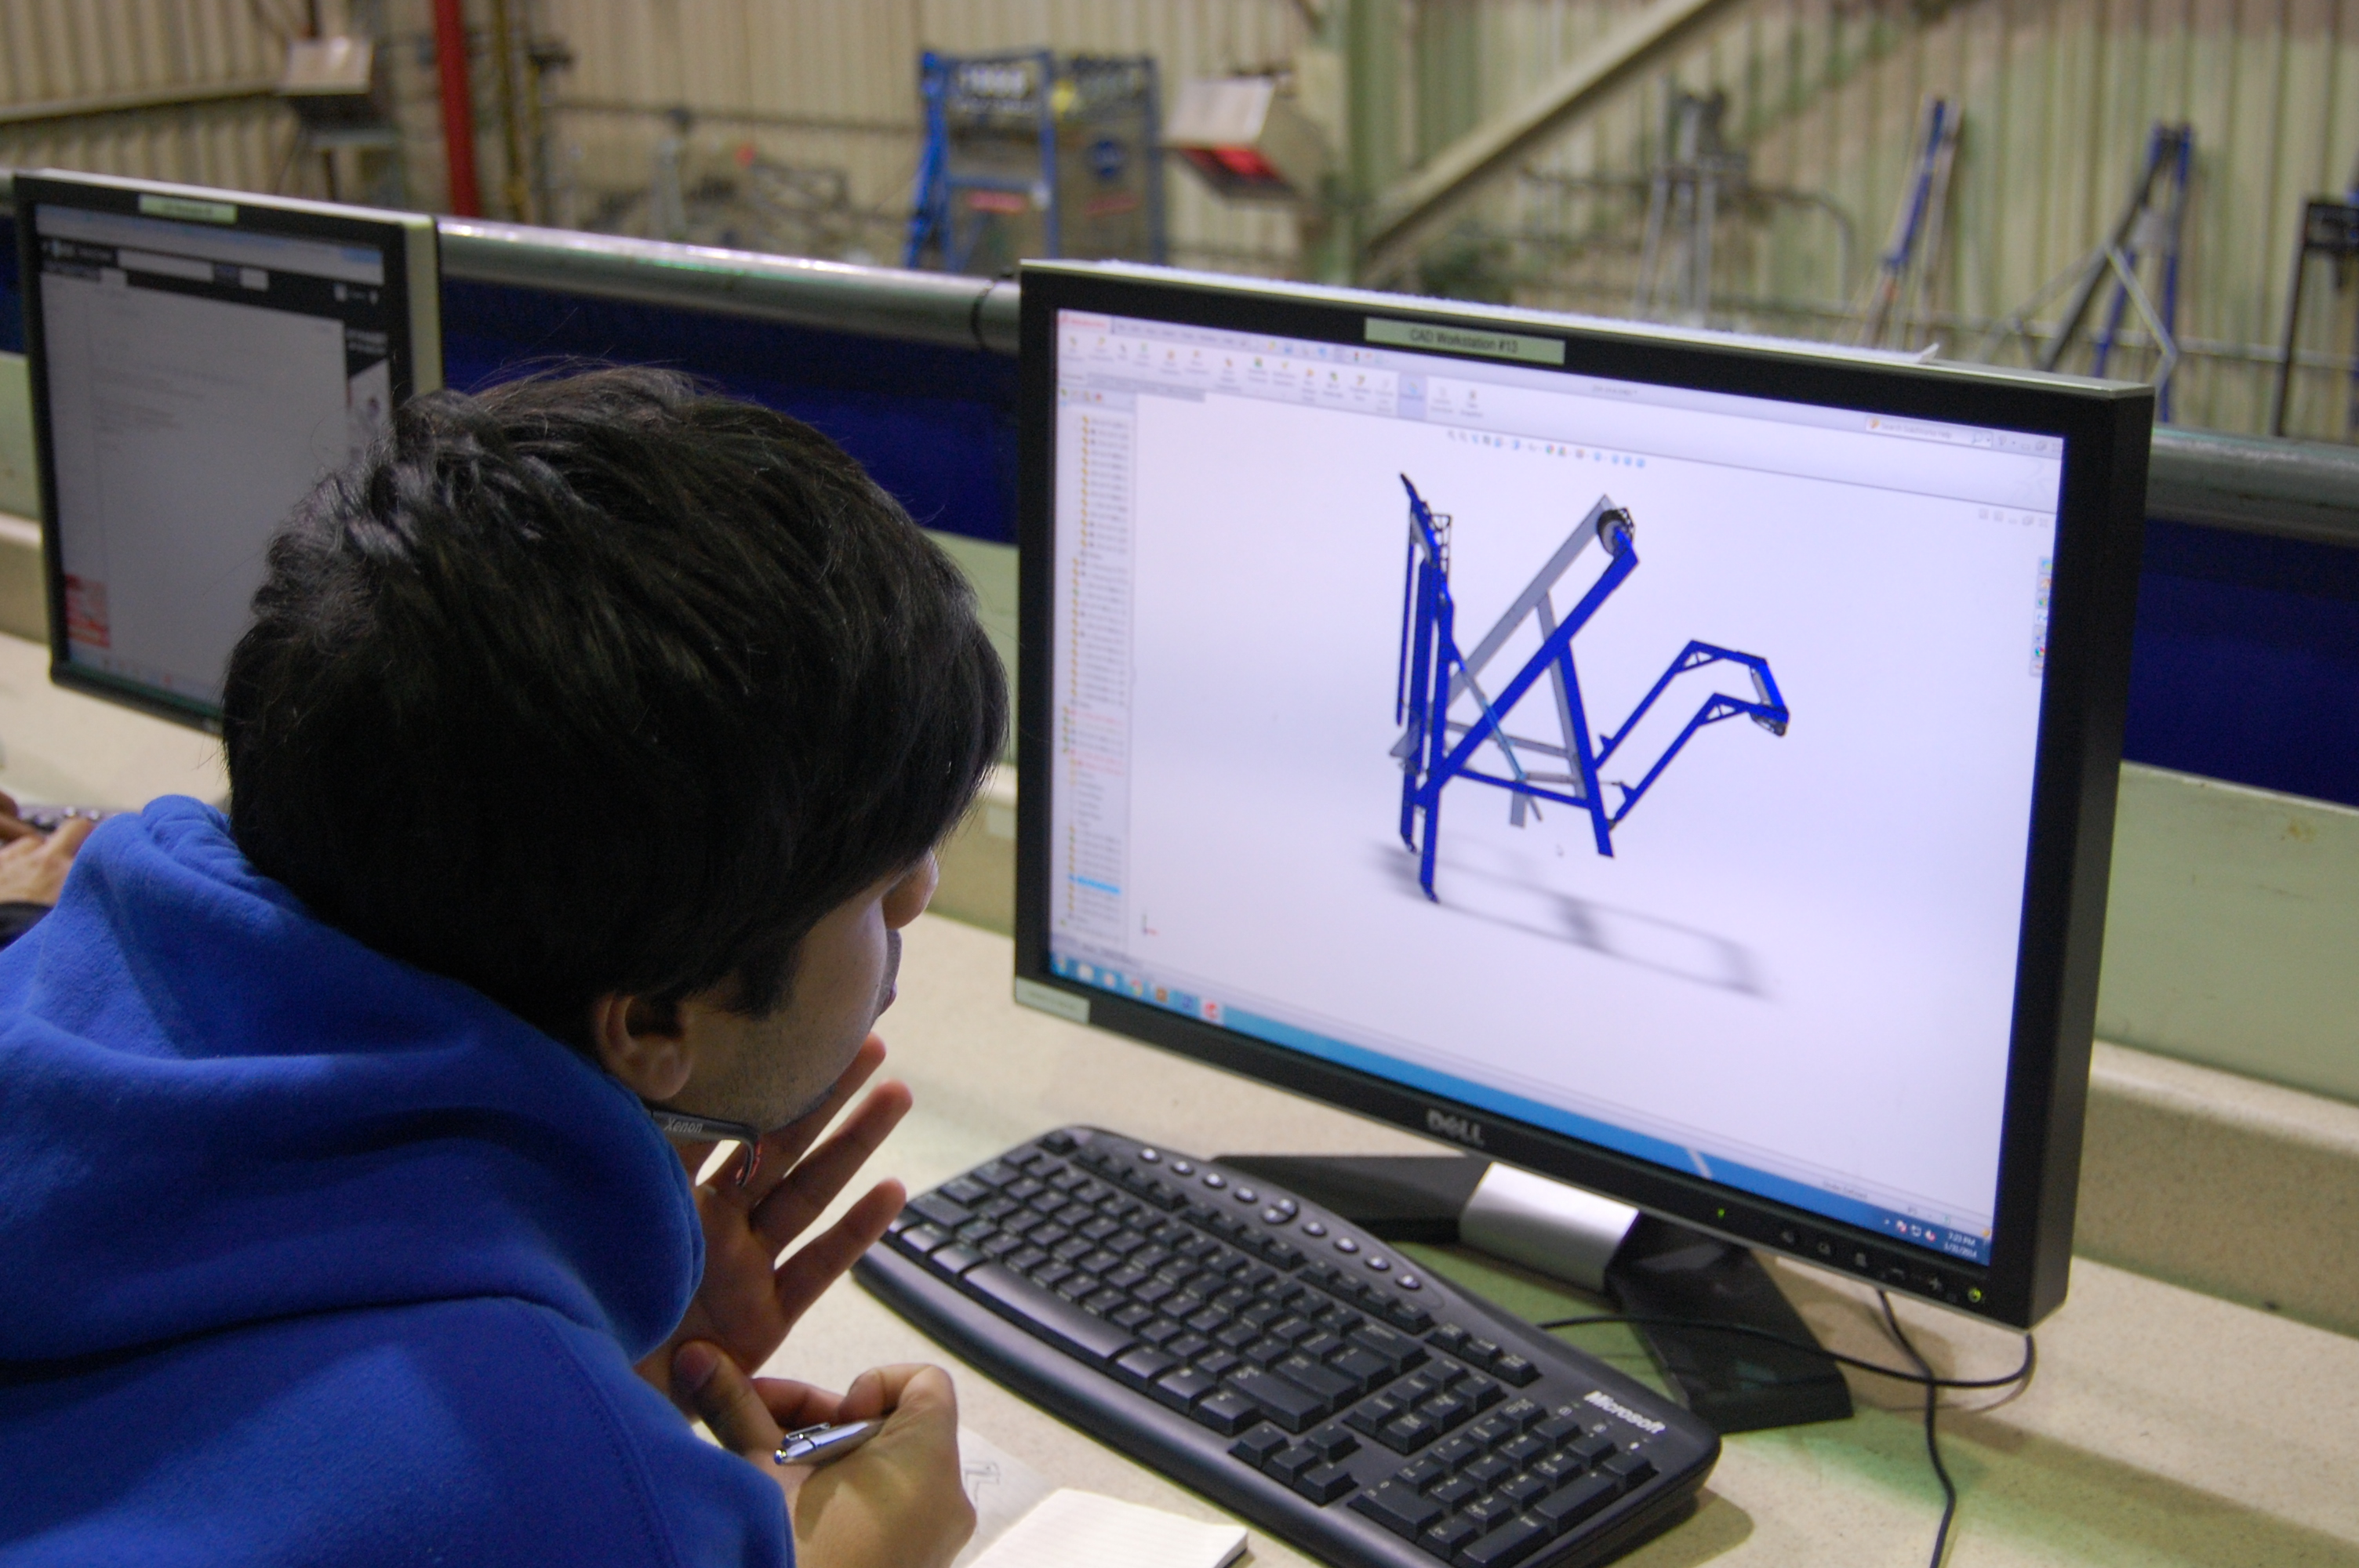 Student examining the superstructure CAD